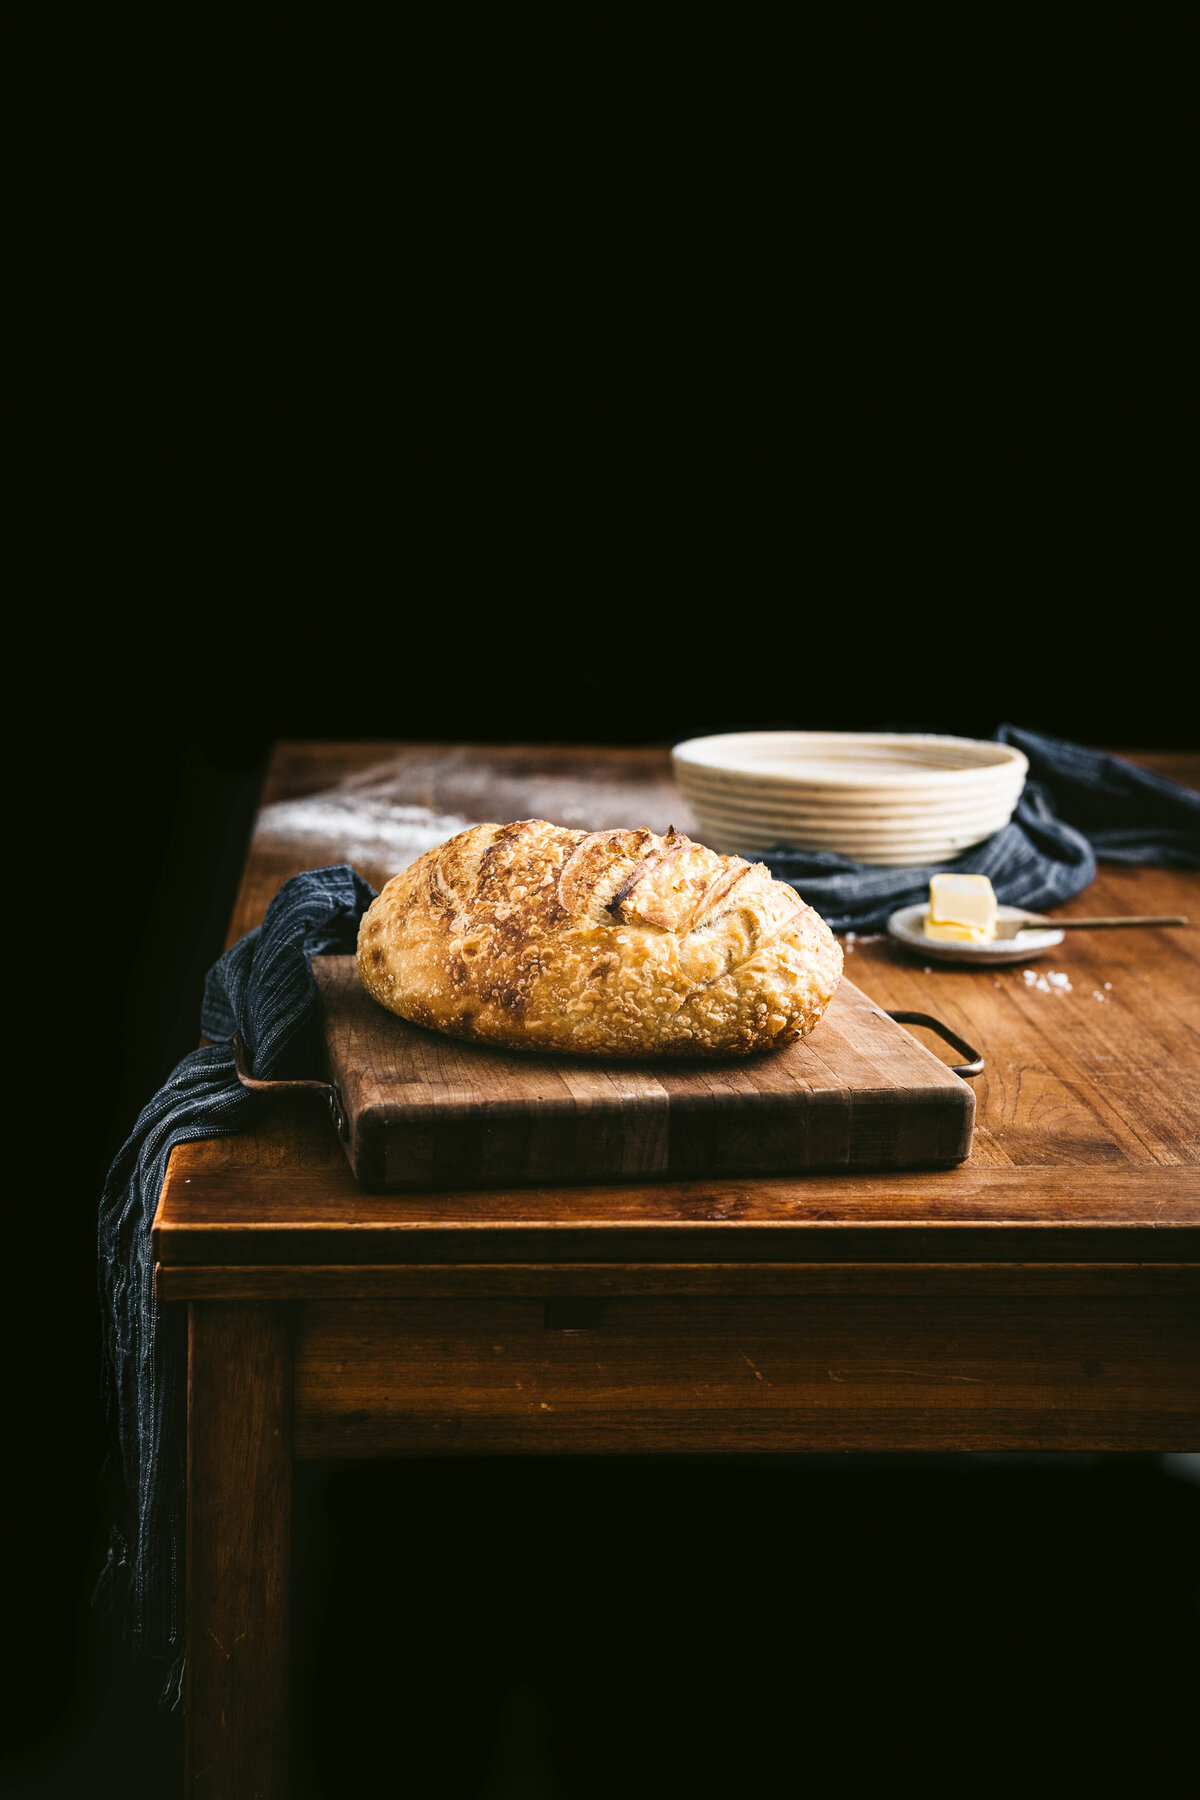 Oval shaped loaf of sourdough on wooden table with cutting board and flour dusted on table